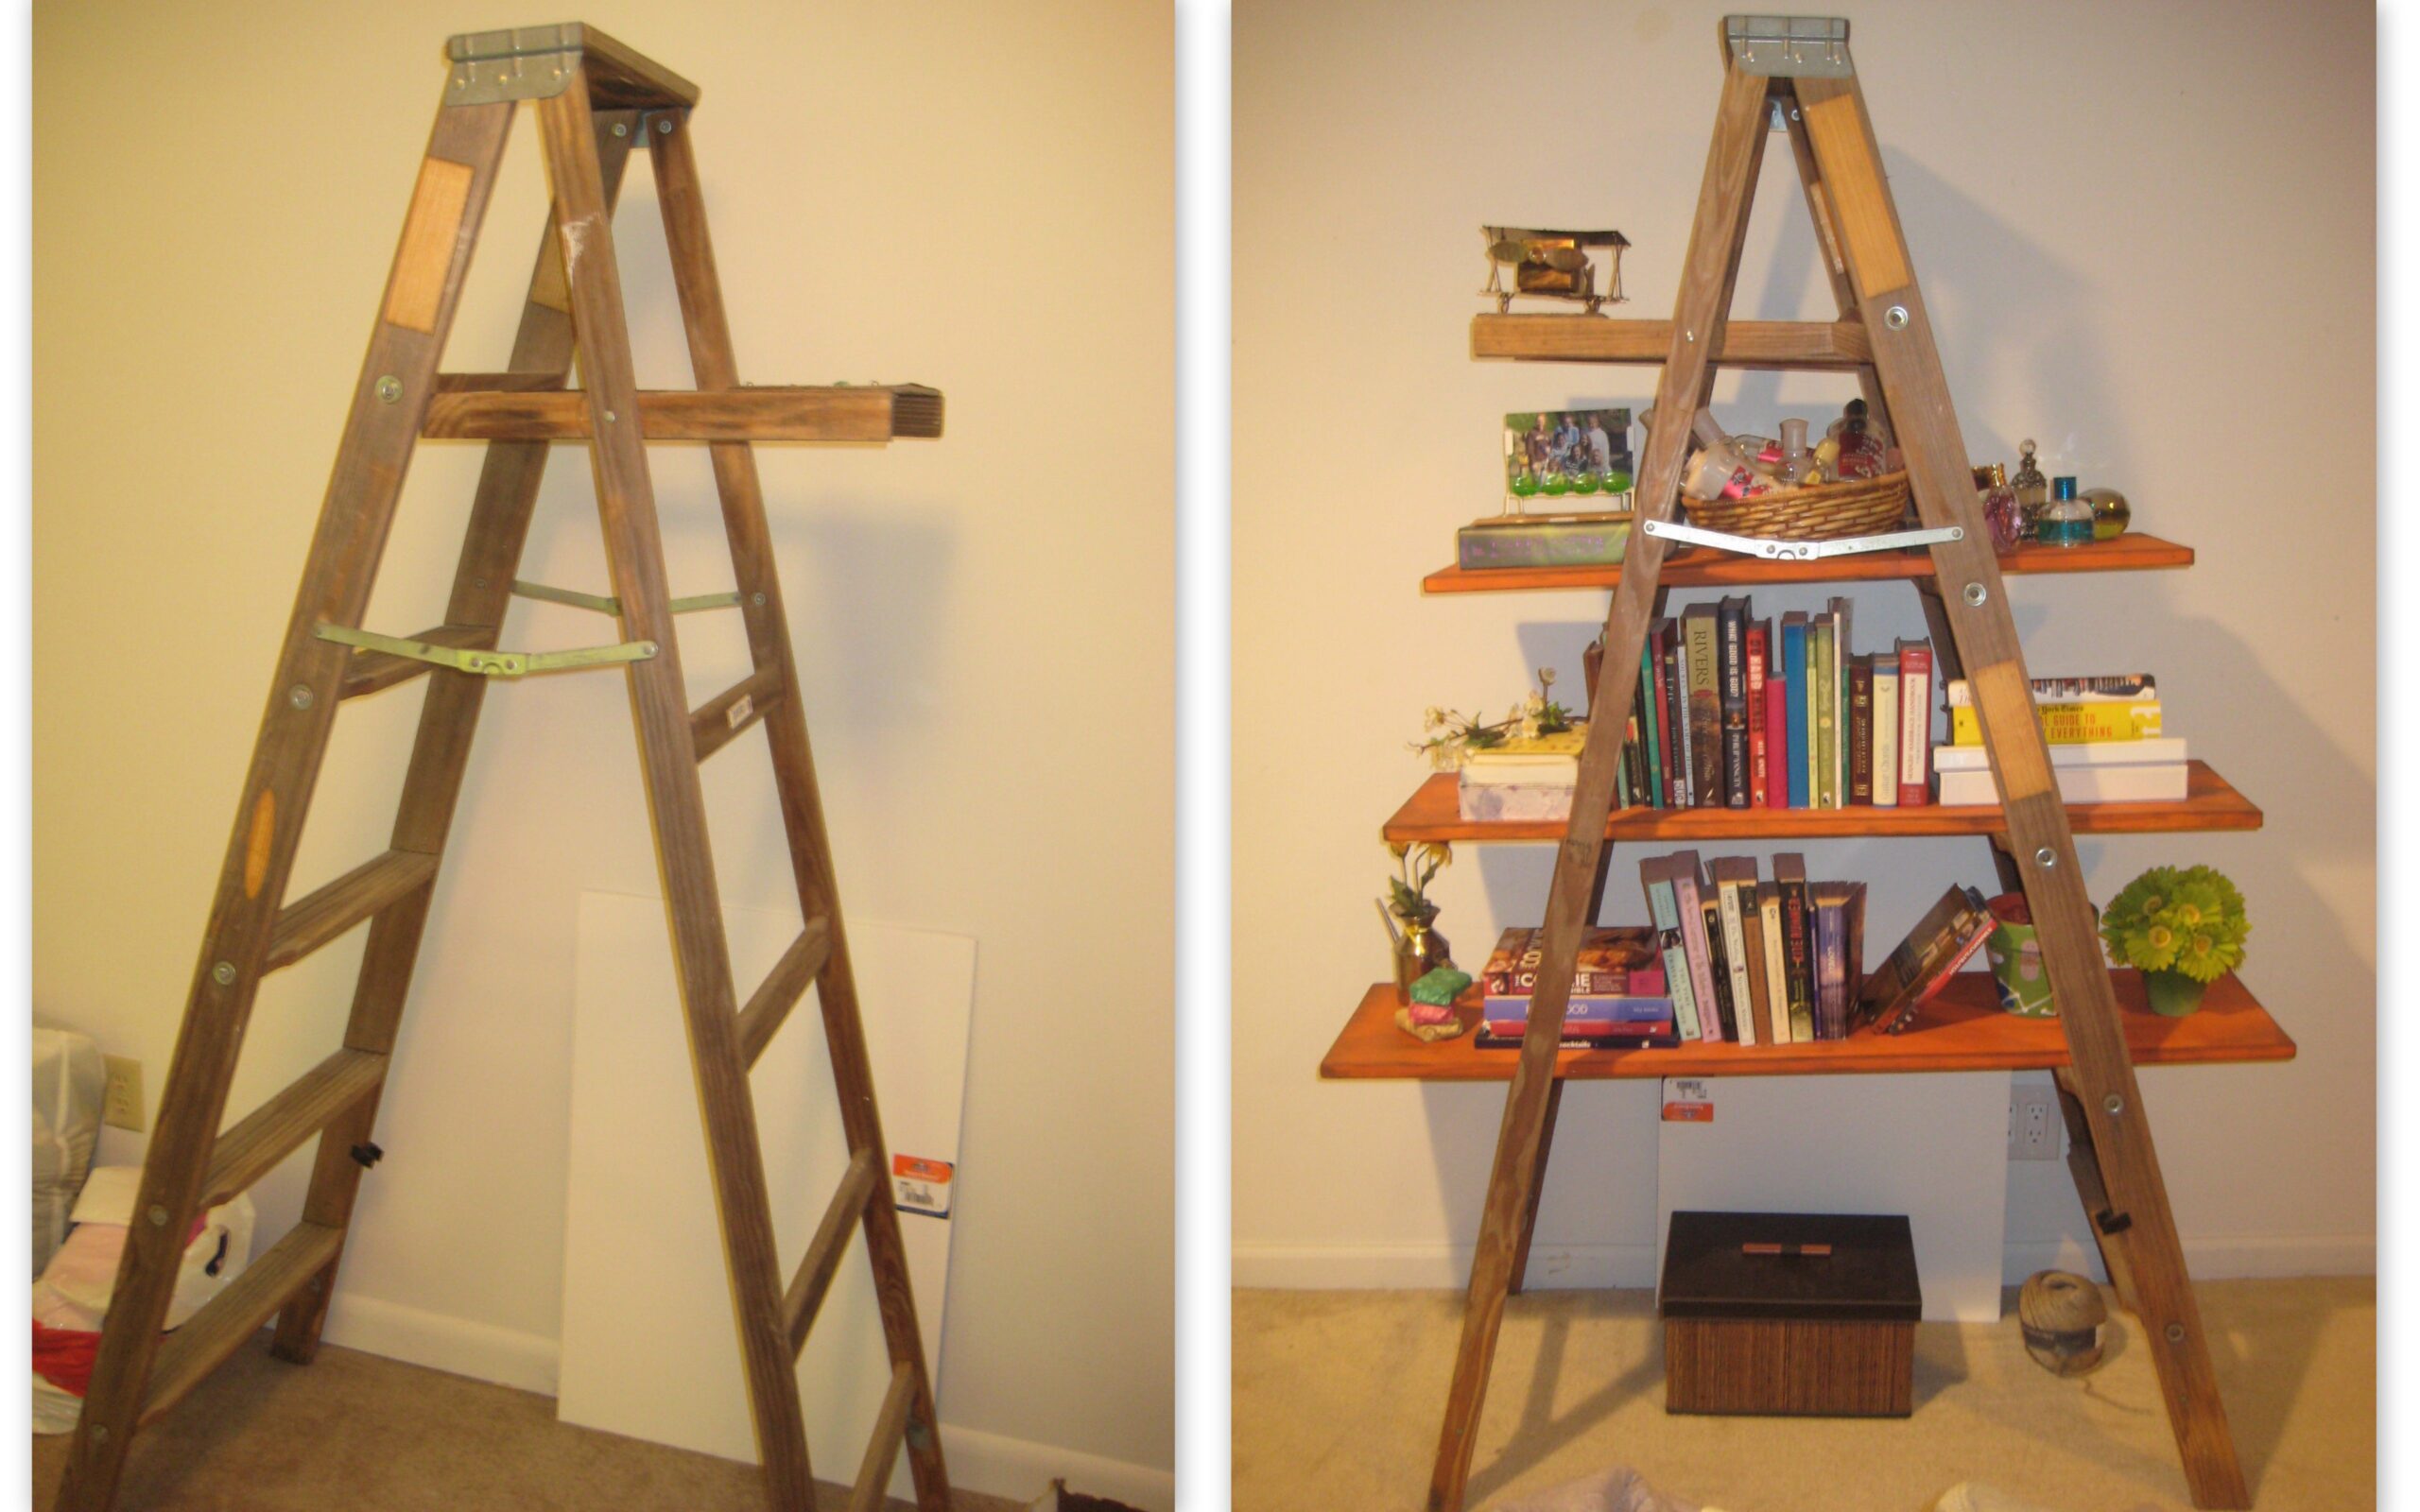 How to Turn an Old Ladder into a Bookshelf